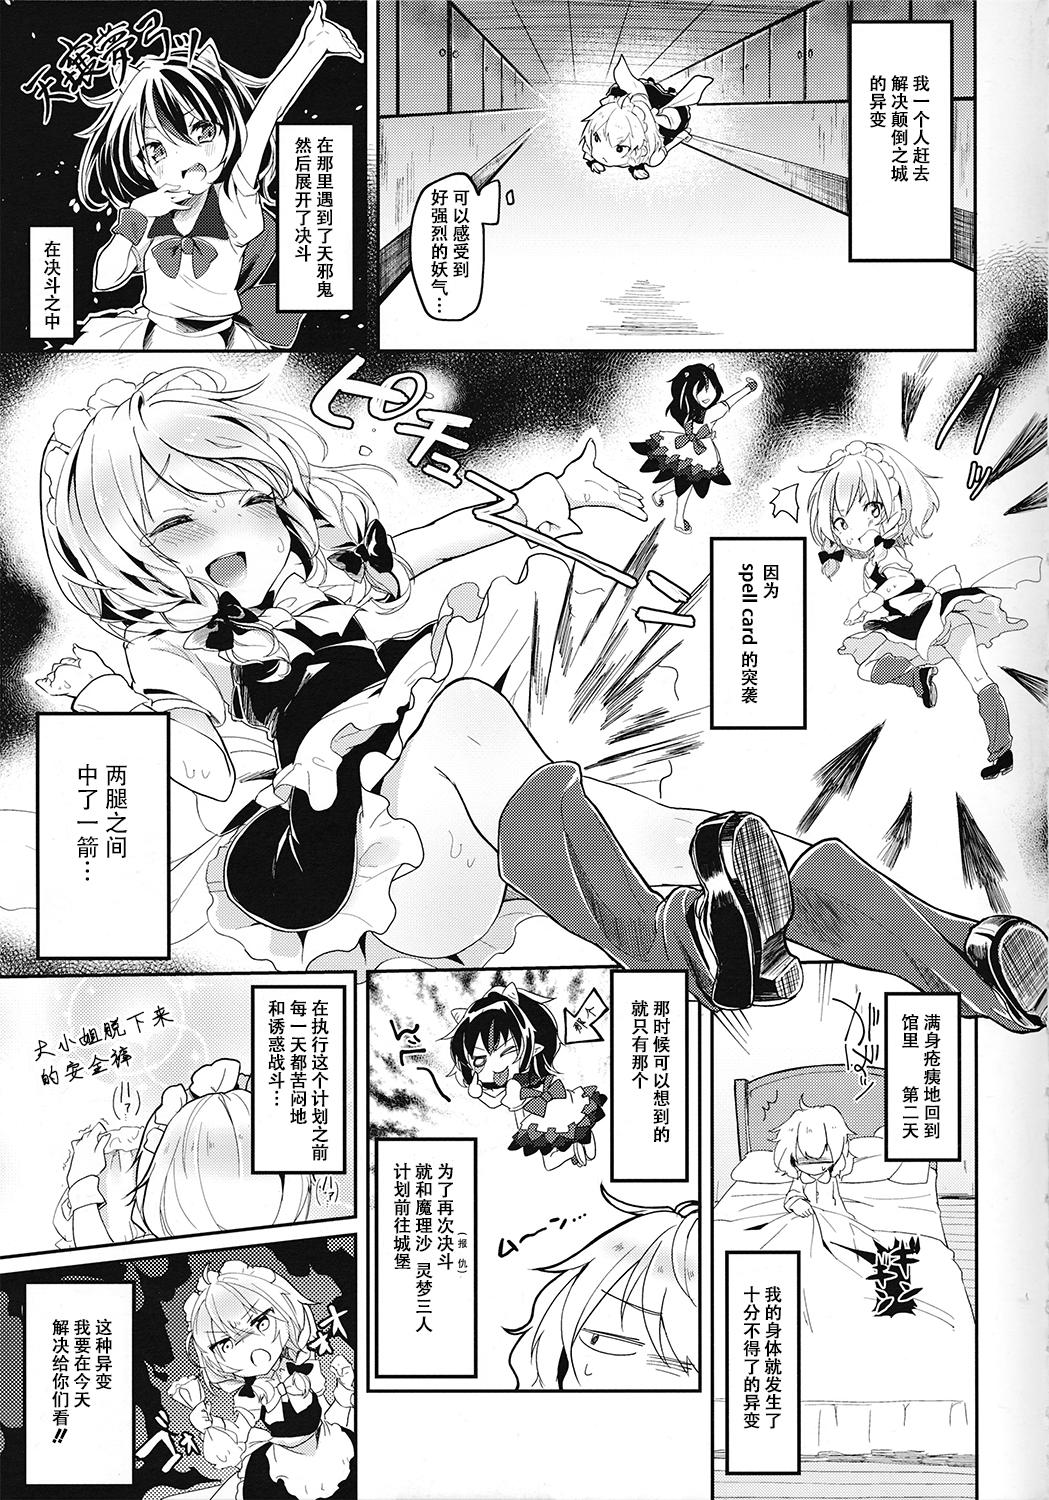 Boobs Reverse Enemy - Touhou project Footfetish - Page 4